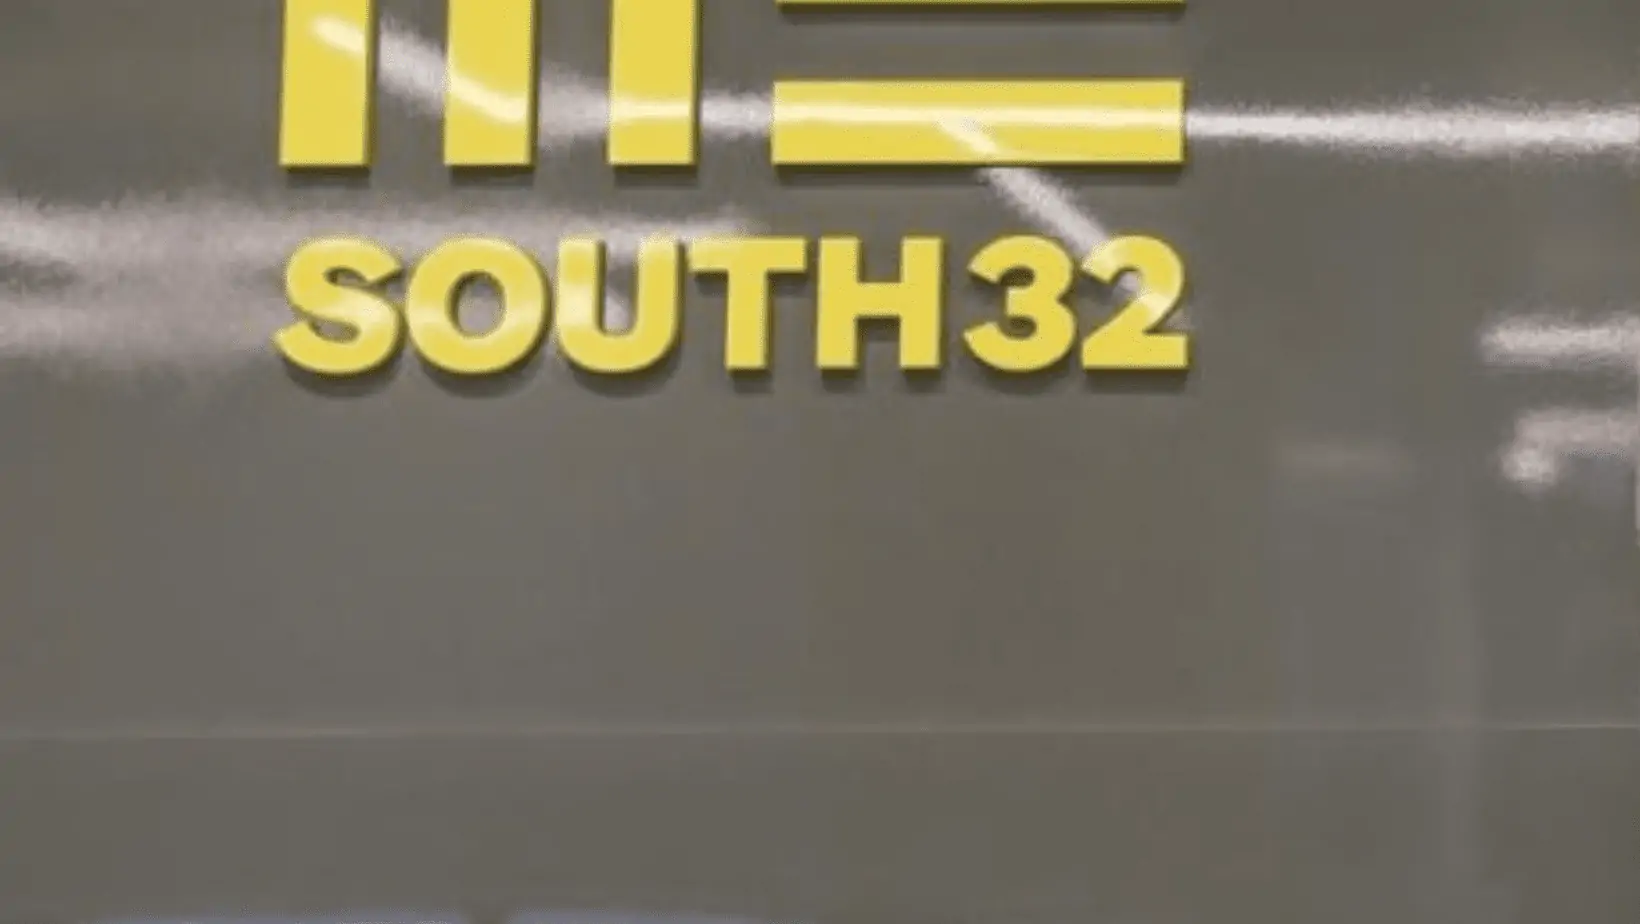 South32 Limited Reports Decline in Half-Year Financial Results